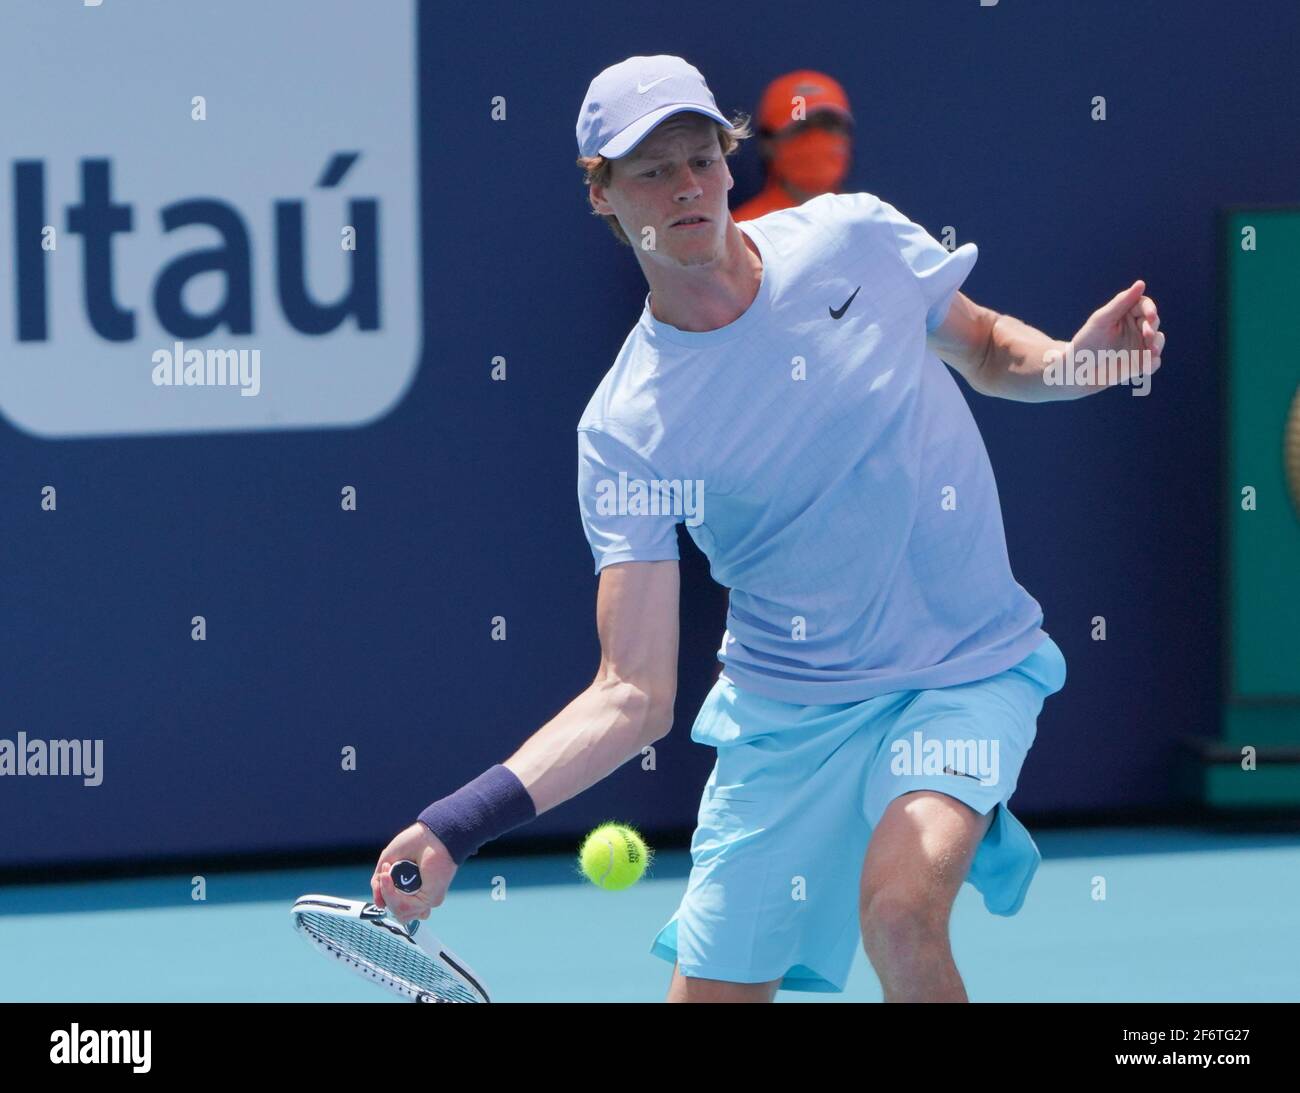 Miami, United States Of America. 02nd Apr, 2021. MIAMI GARDENS, FLORIDA - APRIL 02: Jannick Sinner of Italyreturns a shot to Roberto Bautista Agut of Spain in the semifinals during the Miami Open at Hard Rock Stadium on April 02, 2021 in Miami Gardens, Florida. (Photo by Alberto E. Tamargo/Sipa USA) Credit: Sipa USA/Alamy Live News Stock Photo